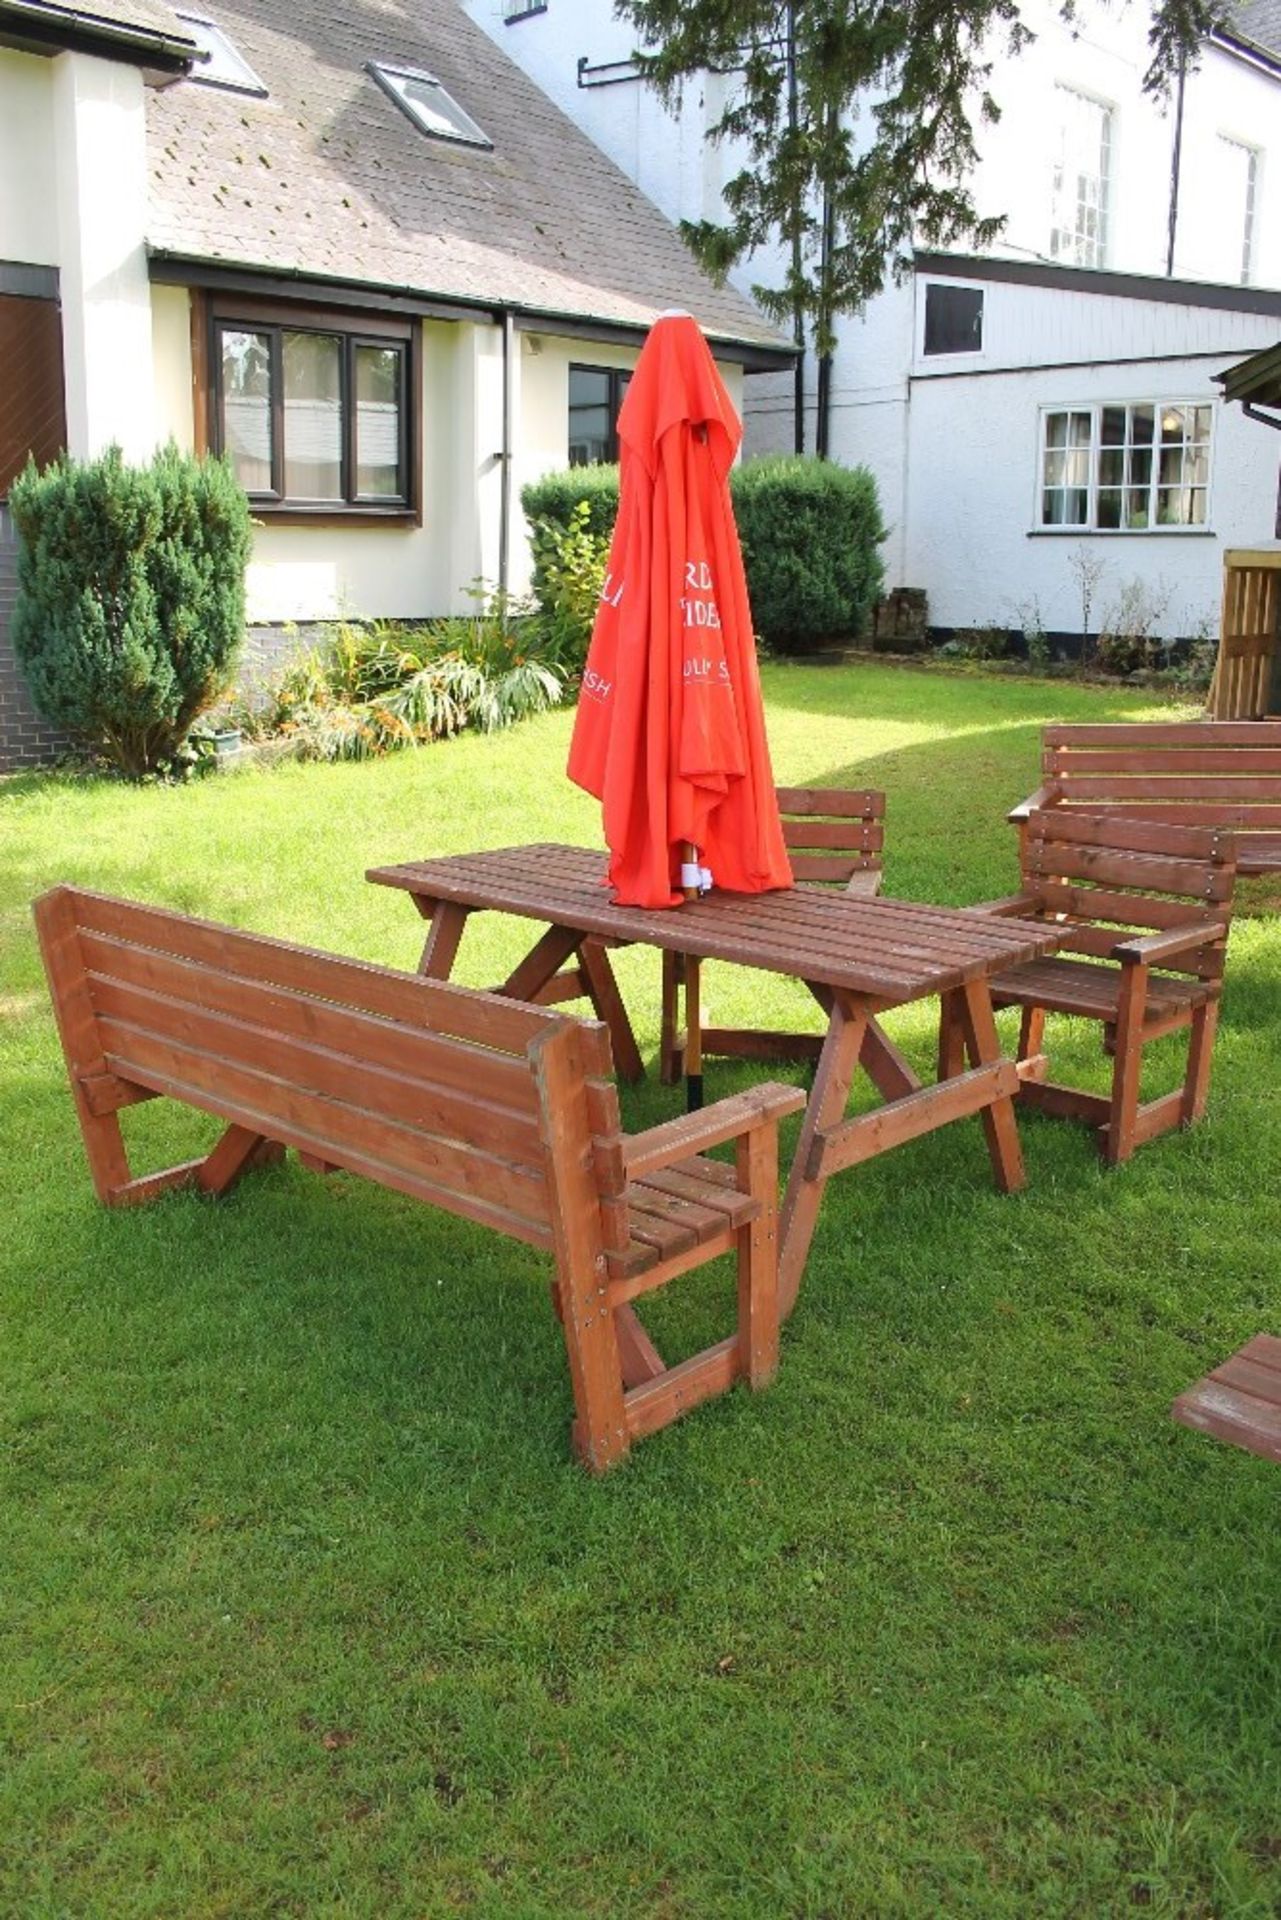 Beer Garden Furniture – Natural Wood – 6 Seater Bench, Table + 2 Chairs + Parasol - Buyer to collect - Image 2 of 3